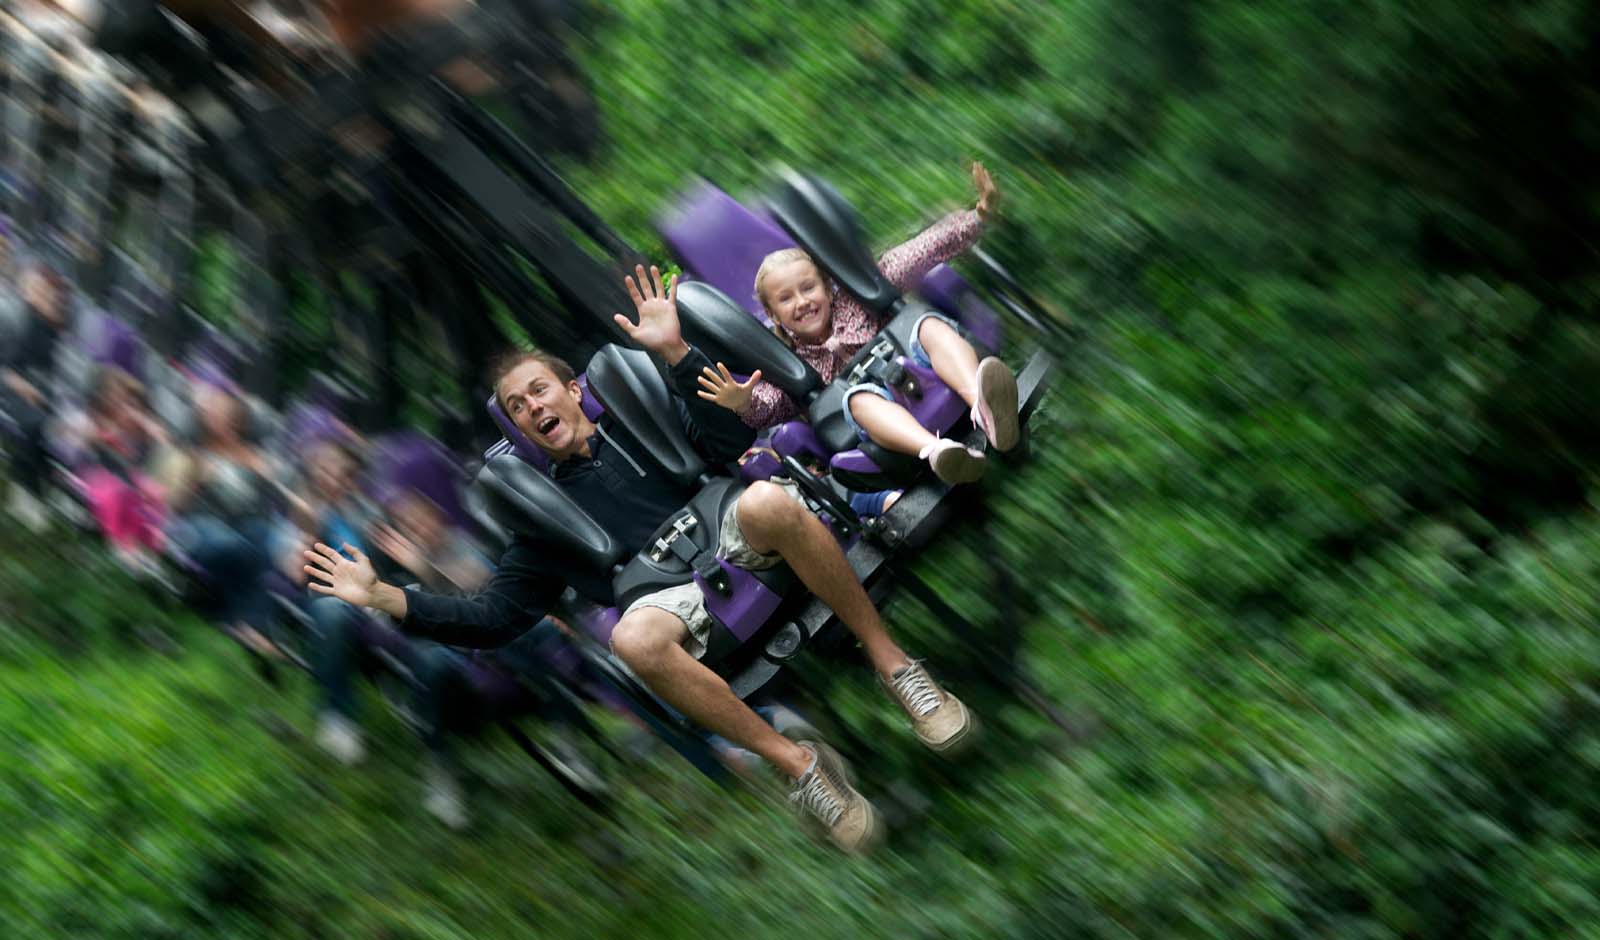 Get a 2nd Day Free at Chessington World of Adventures